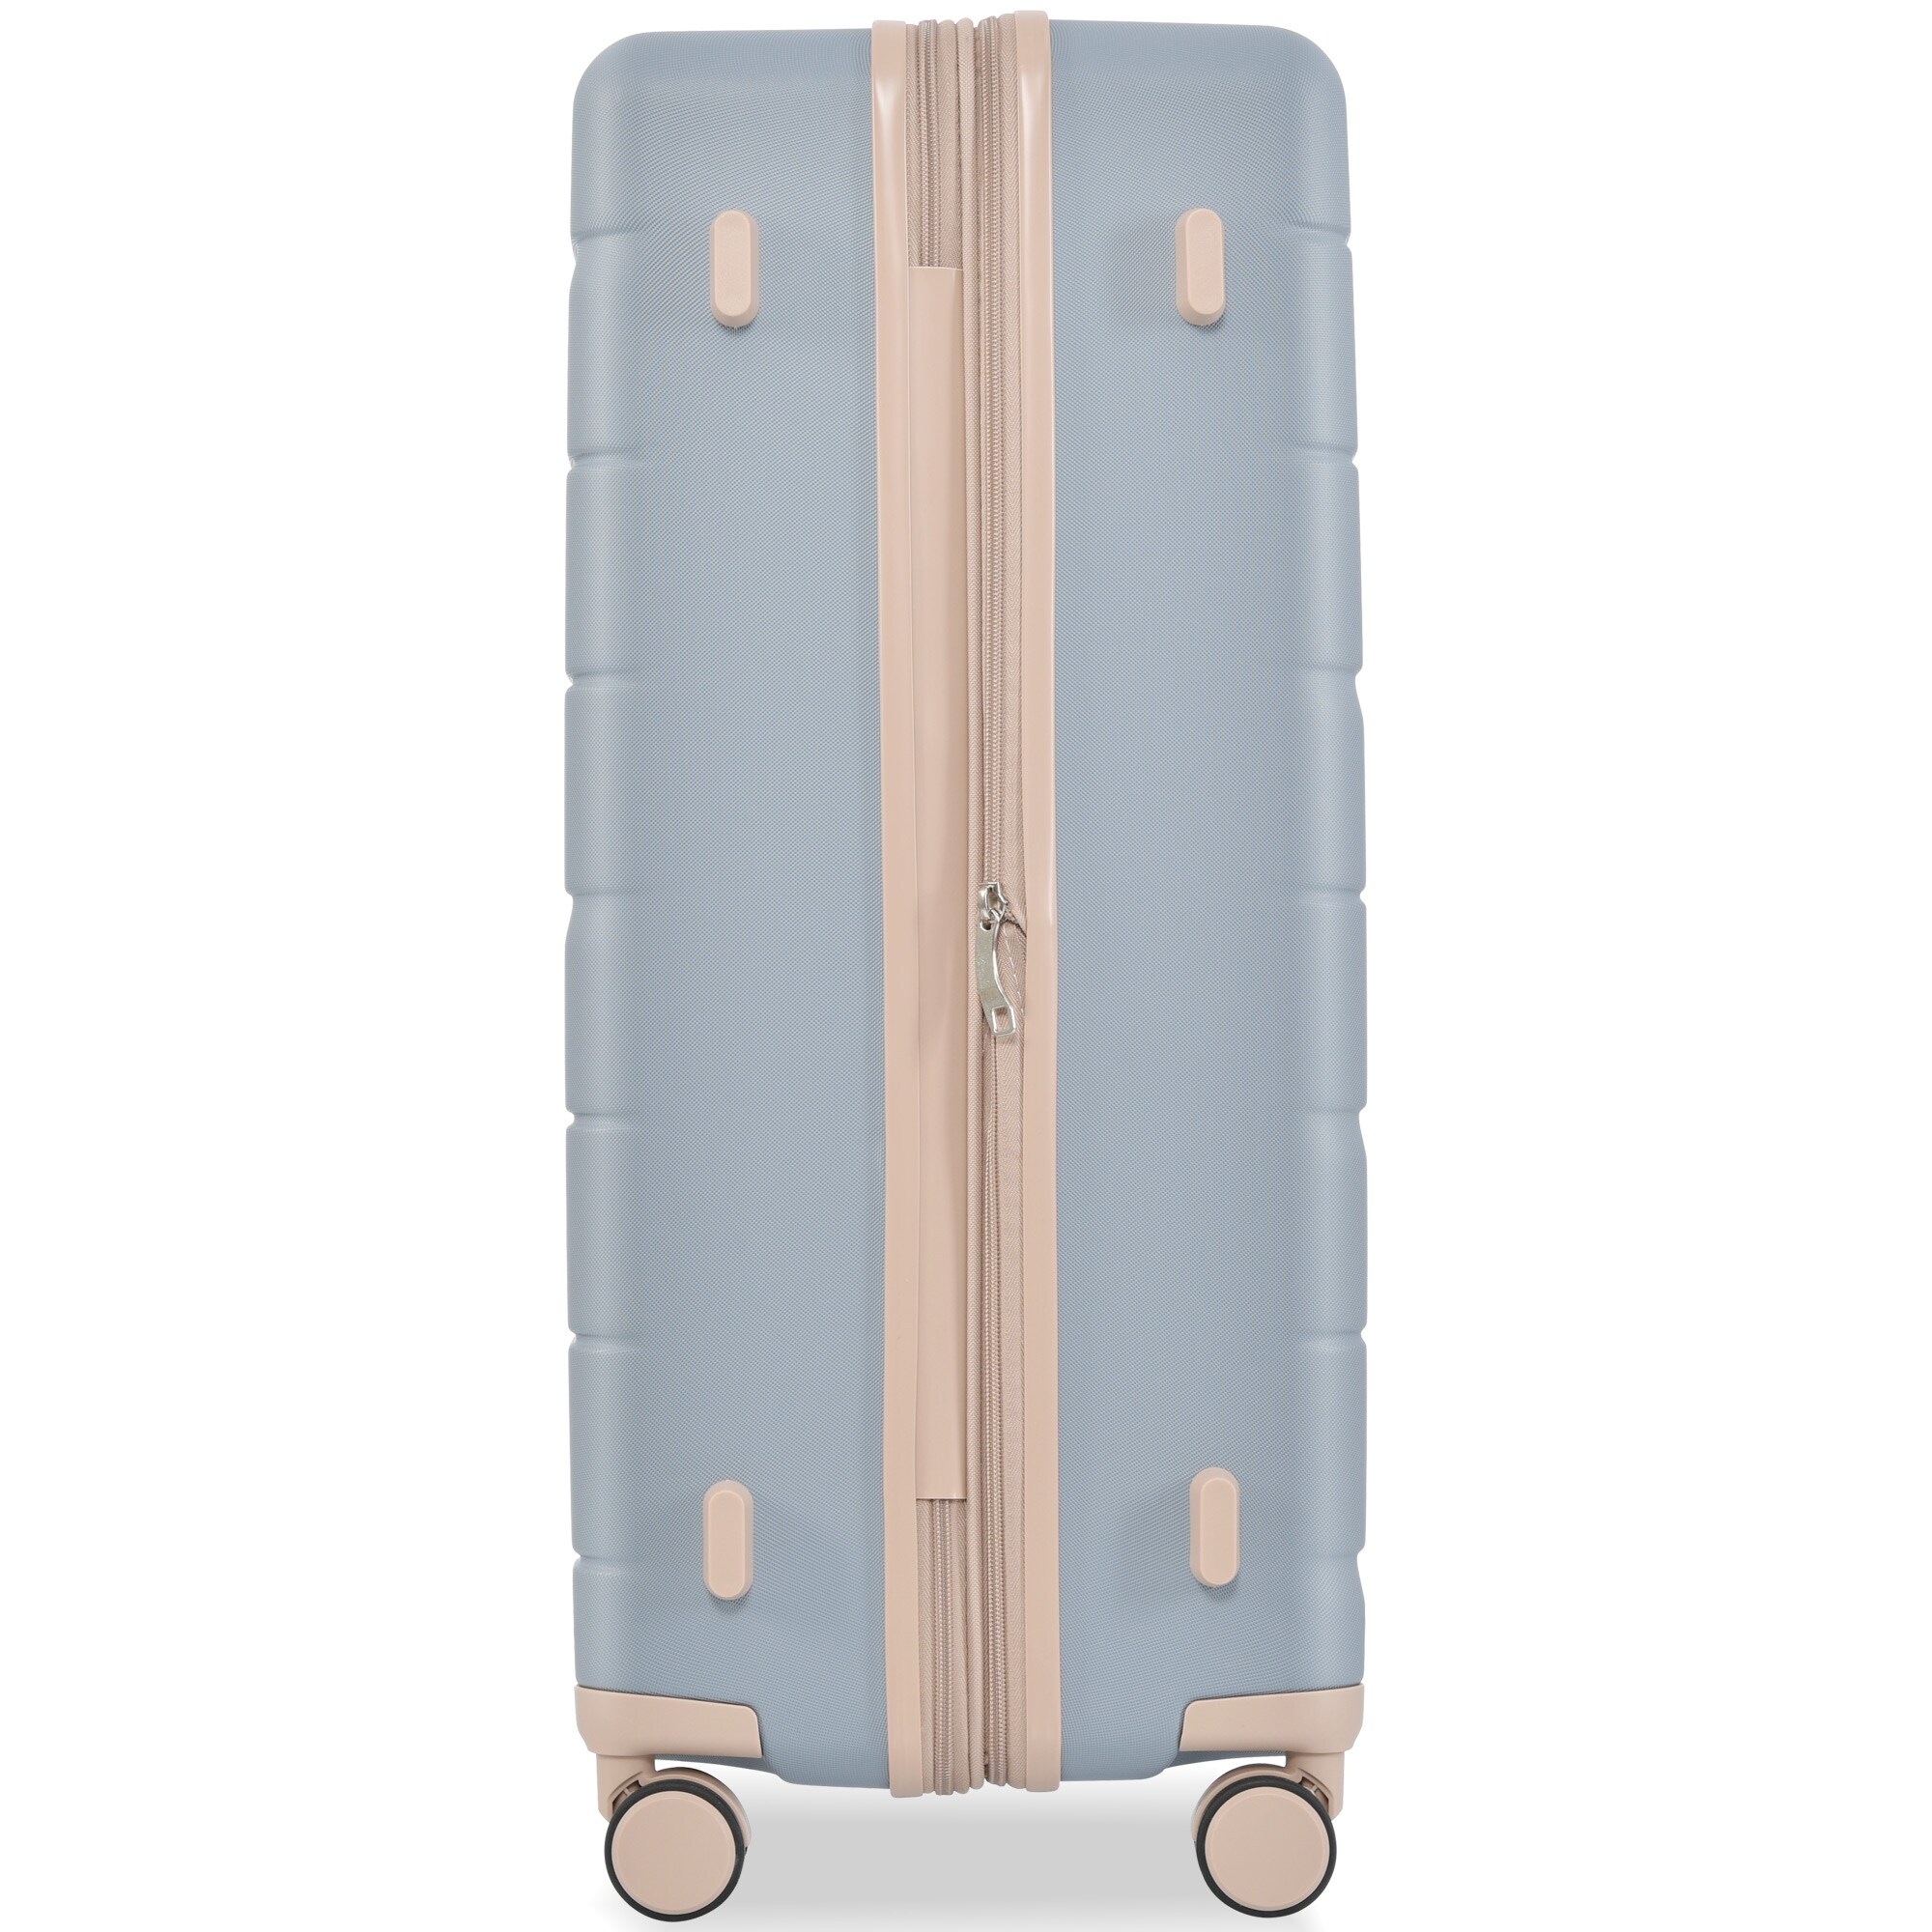 Luggage Sets 3 Piece Suitcase Set 20/24/28,Carry on Luggage Airline  Approved,Hard Case with Spinner Wheels - Bed Bath & Beyond - 38422008